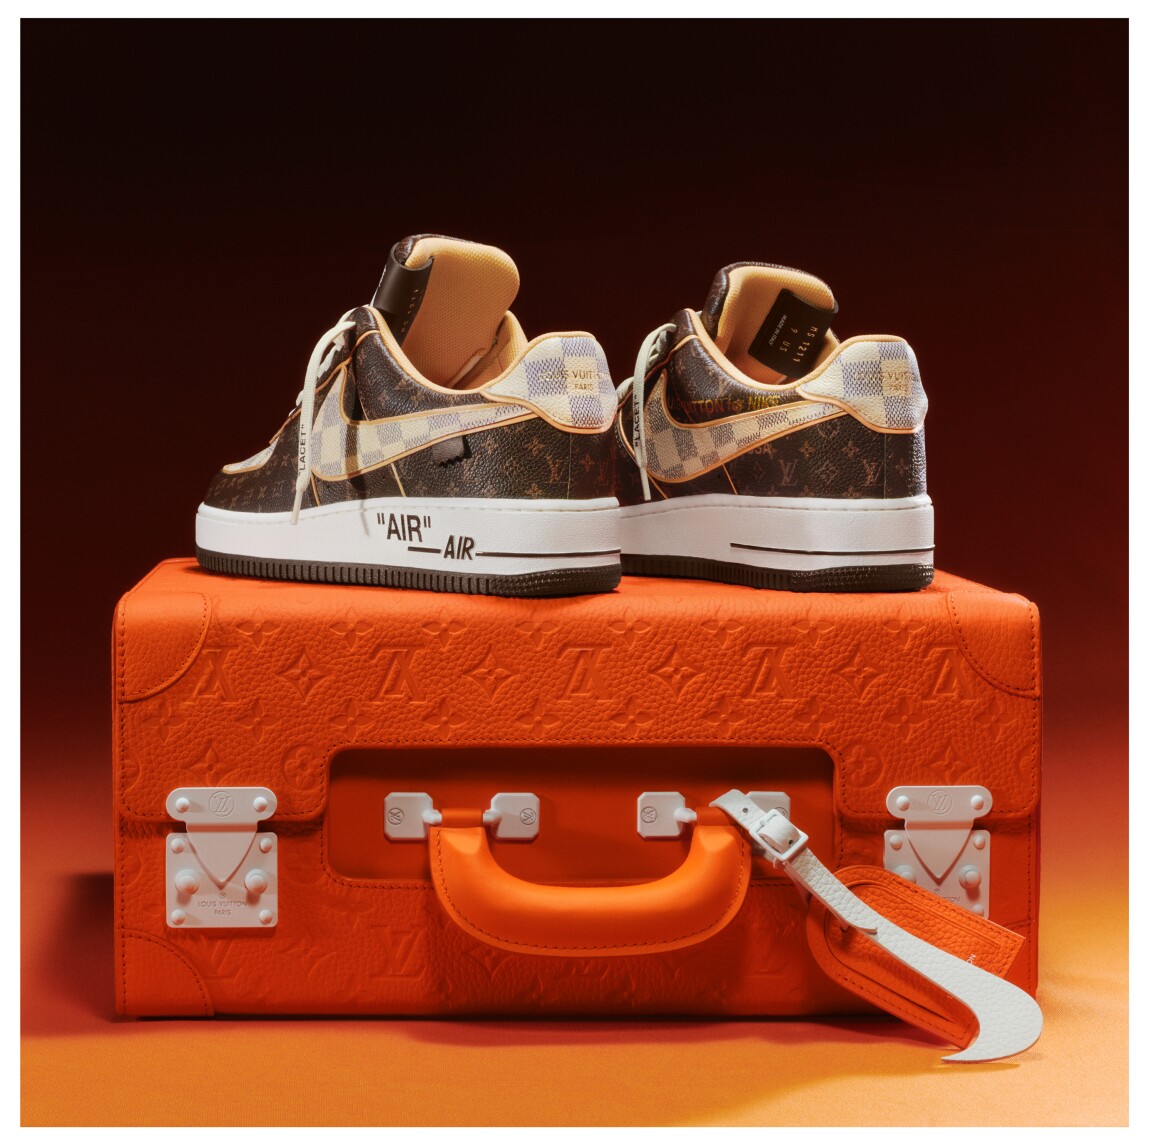 Louis Vuitton x Nike Air Force 1s By Virgil Abloh Sell For $35 Million